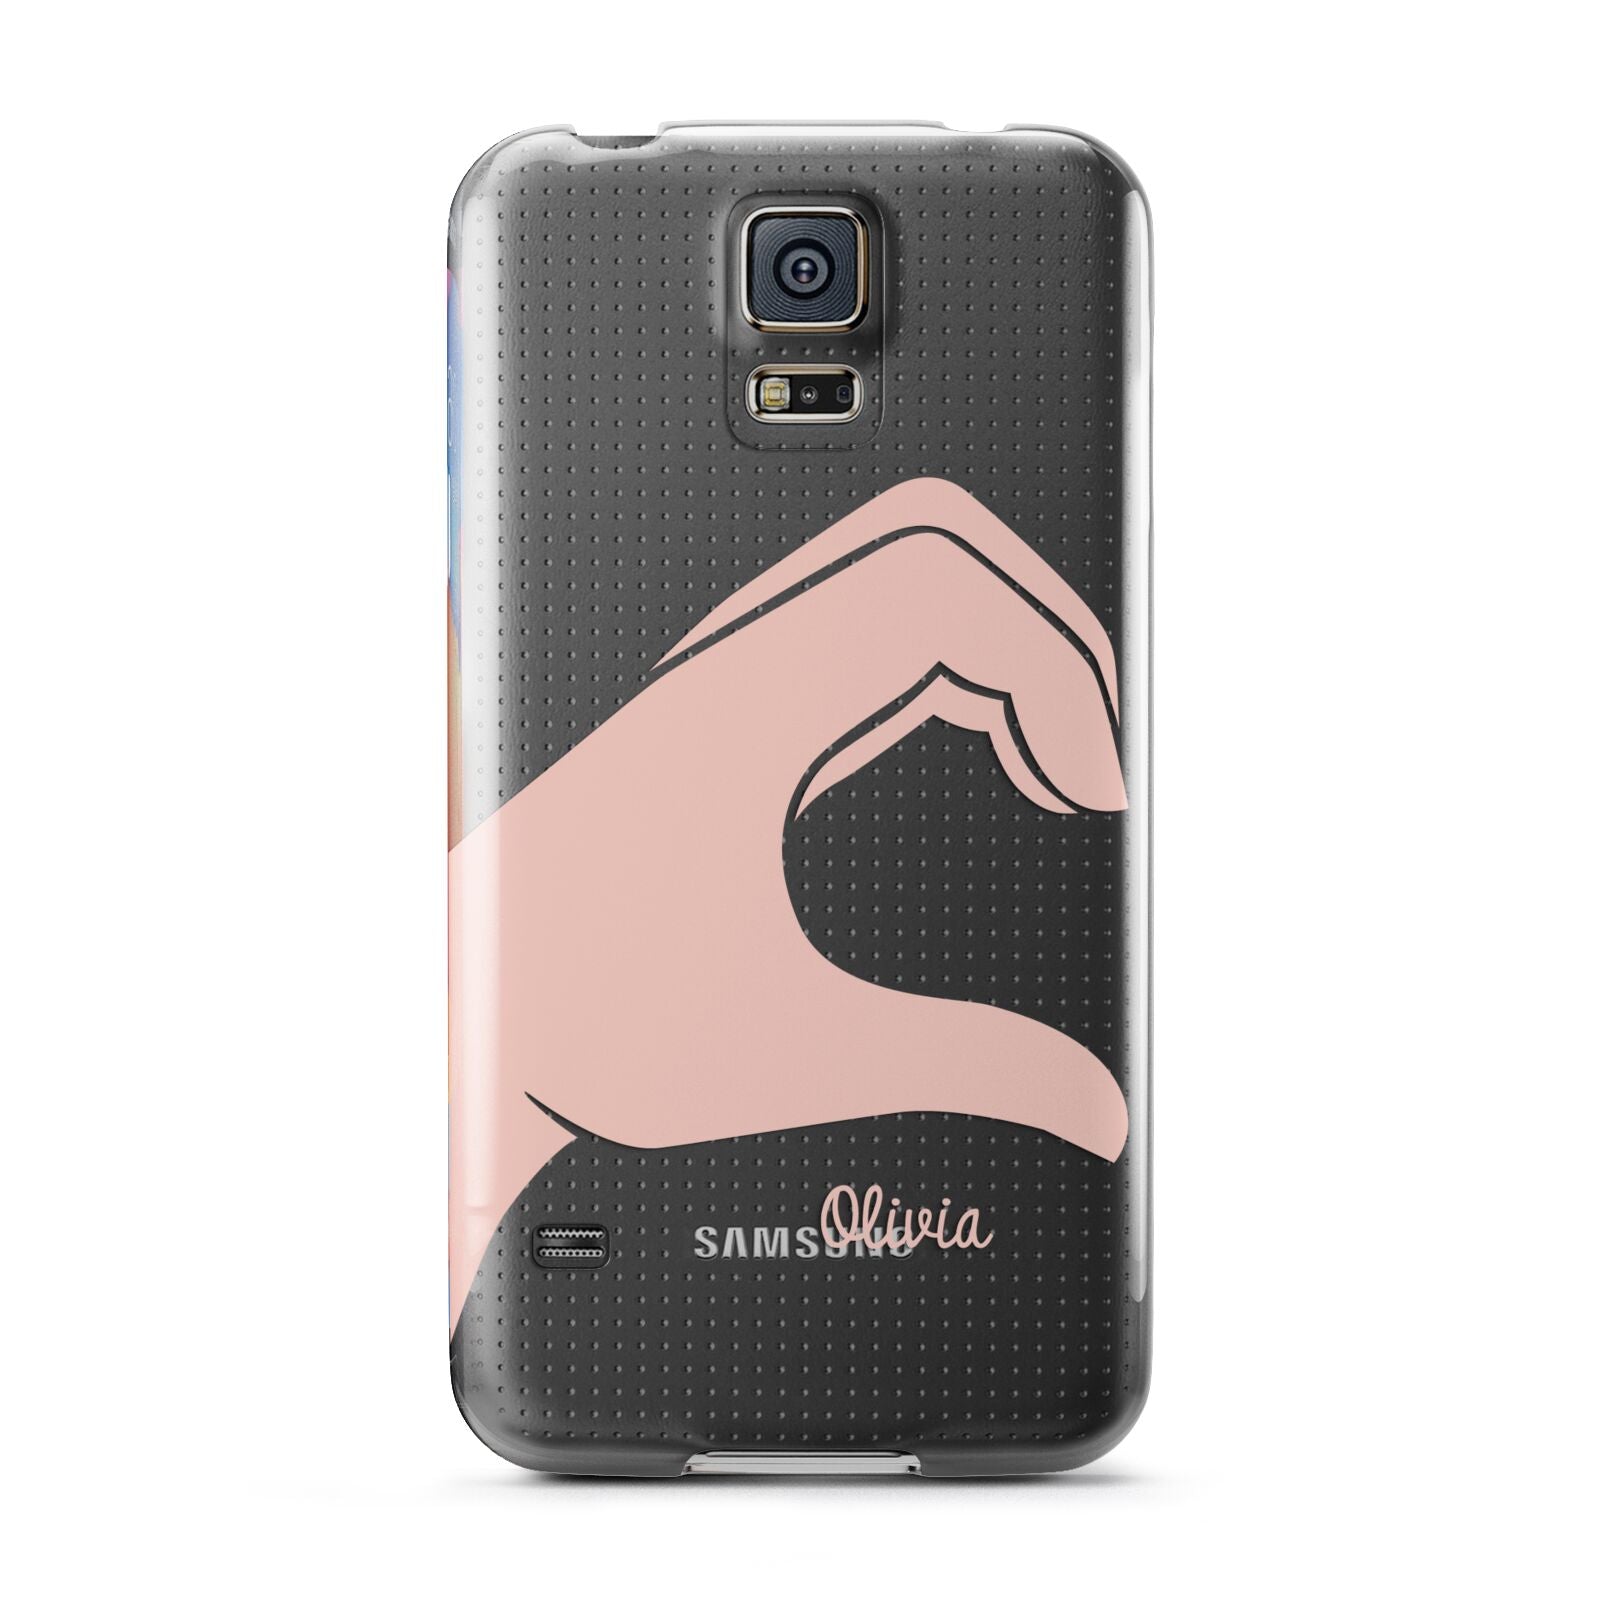 Left Hand in Half Heart with Name Samsung Galaxy S5 Case